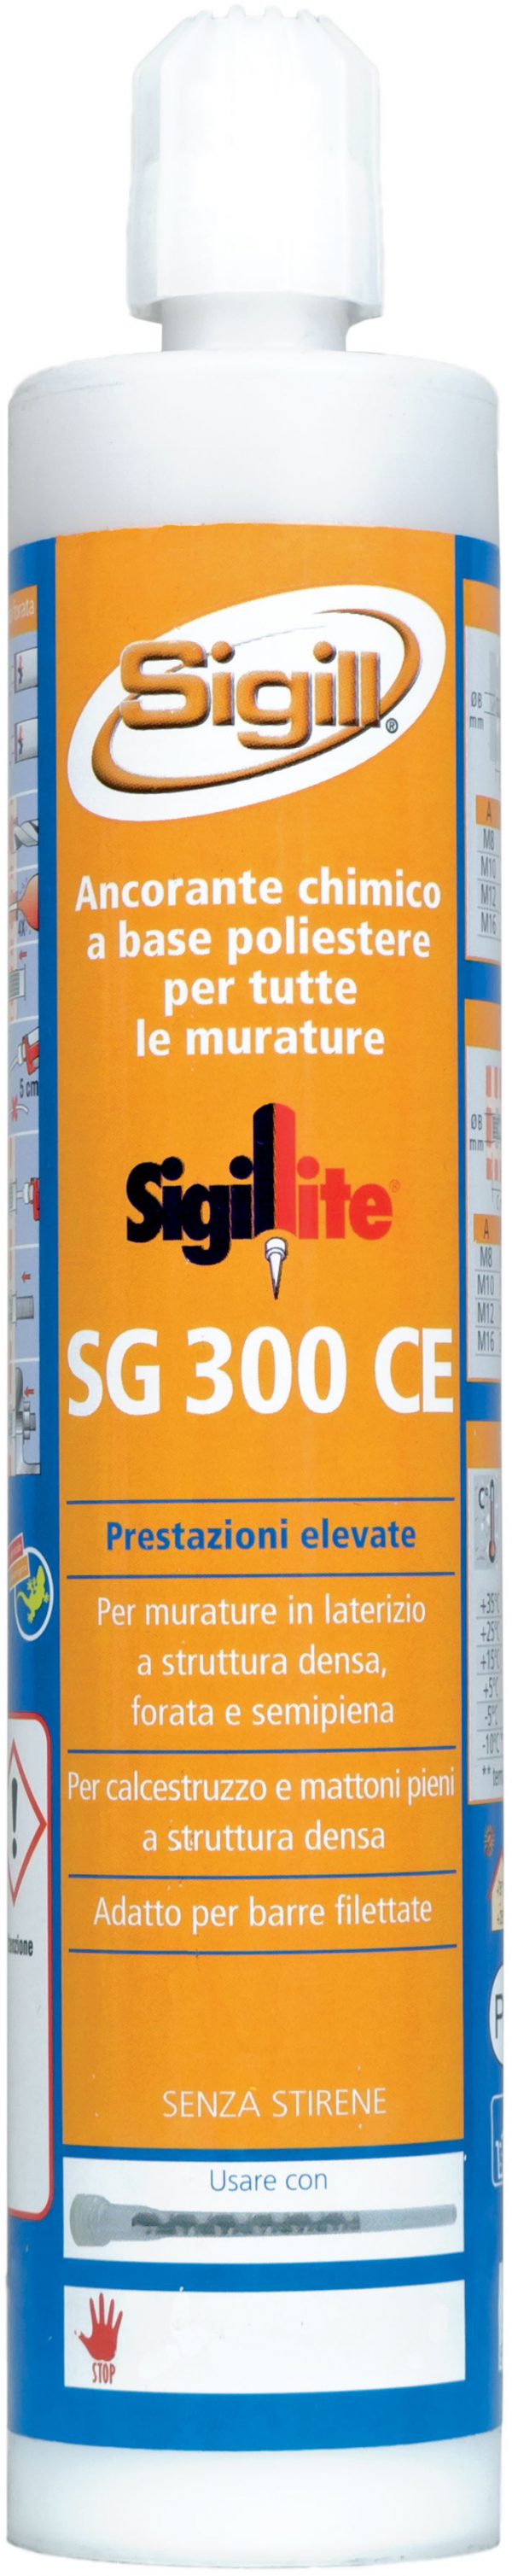 construction sealant. Two-component polyester resin with strong grip, SIGILLITE SG 300 CE